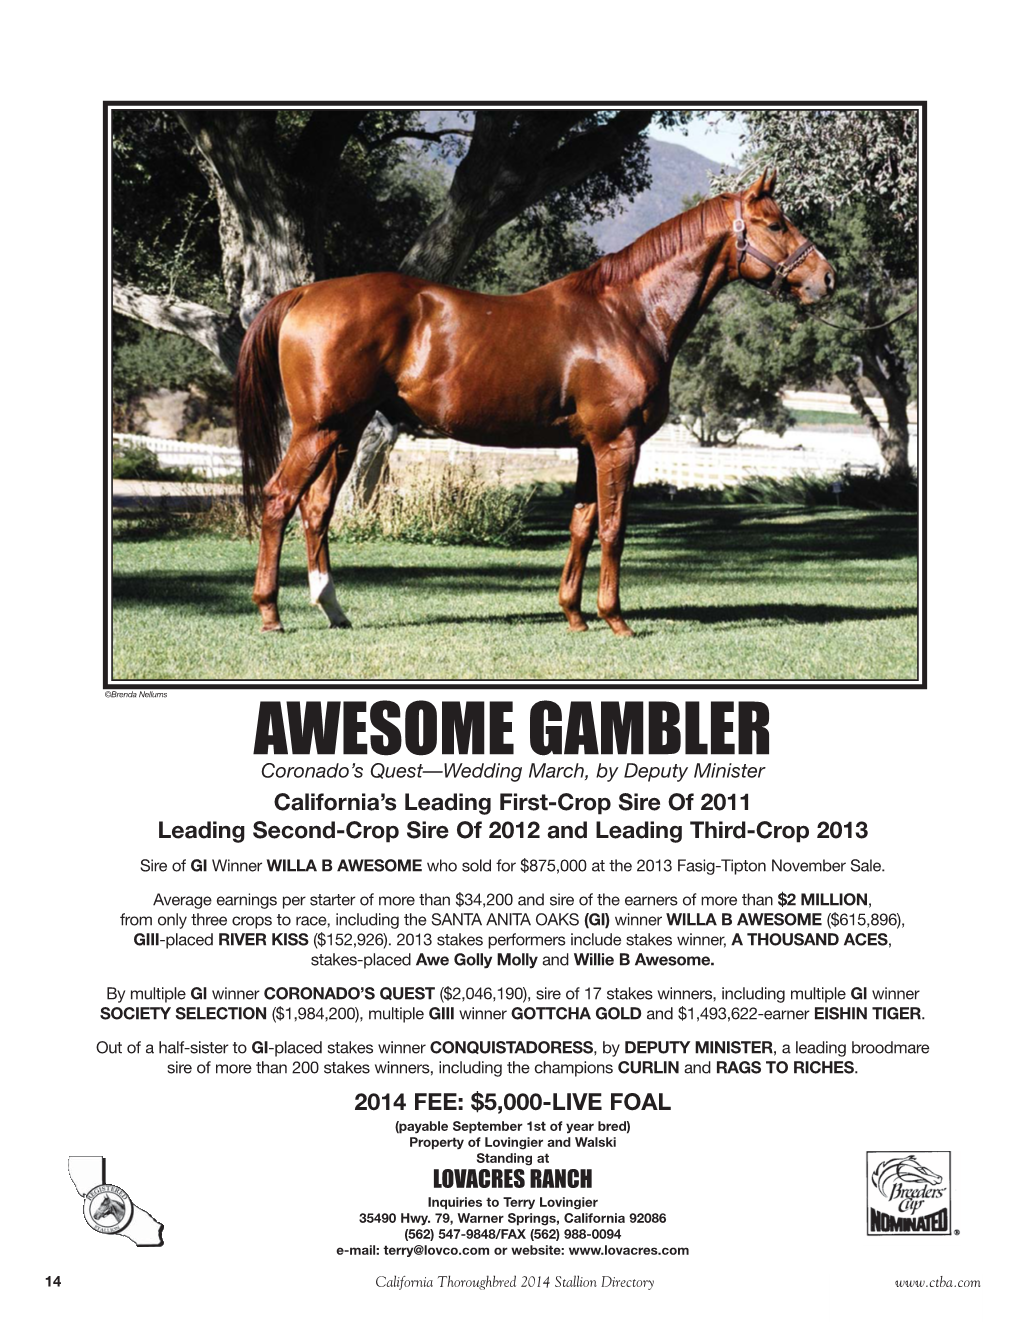 AWESOME GAMBLER:Layout 1 12/2/13 1:28 PM Page 1